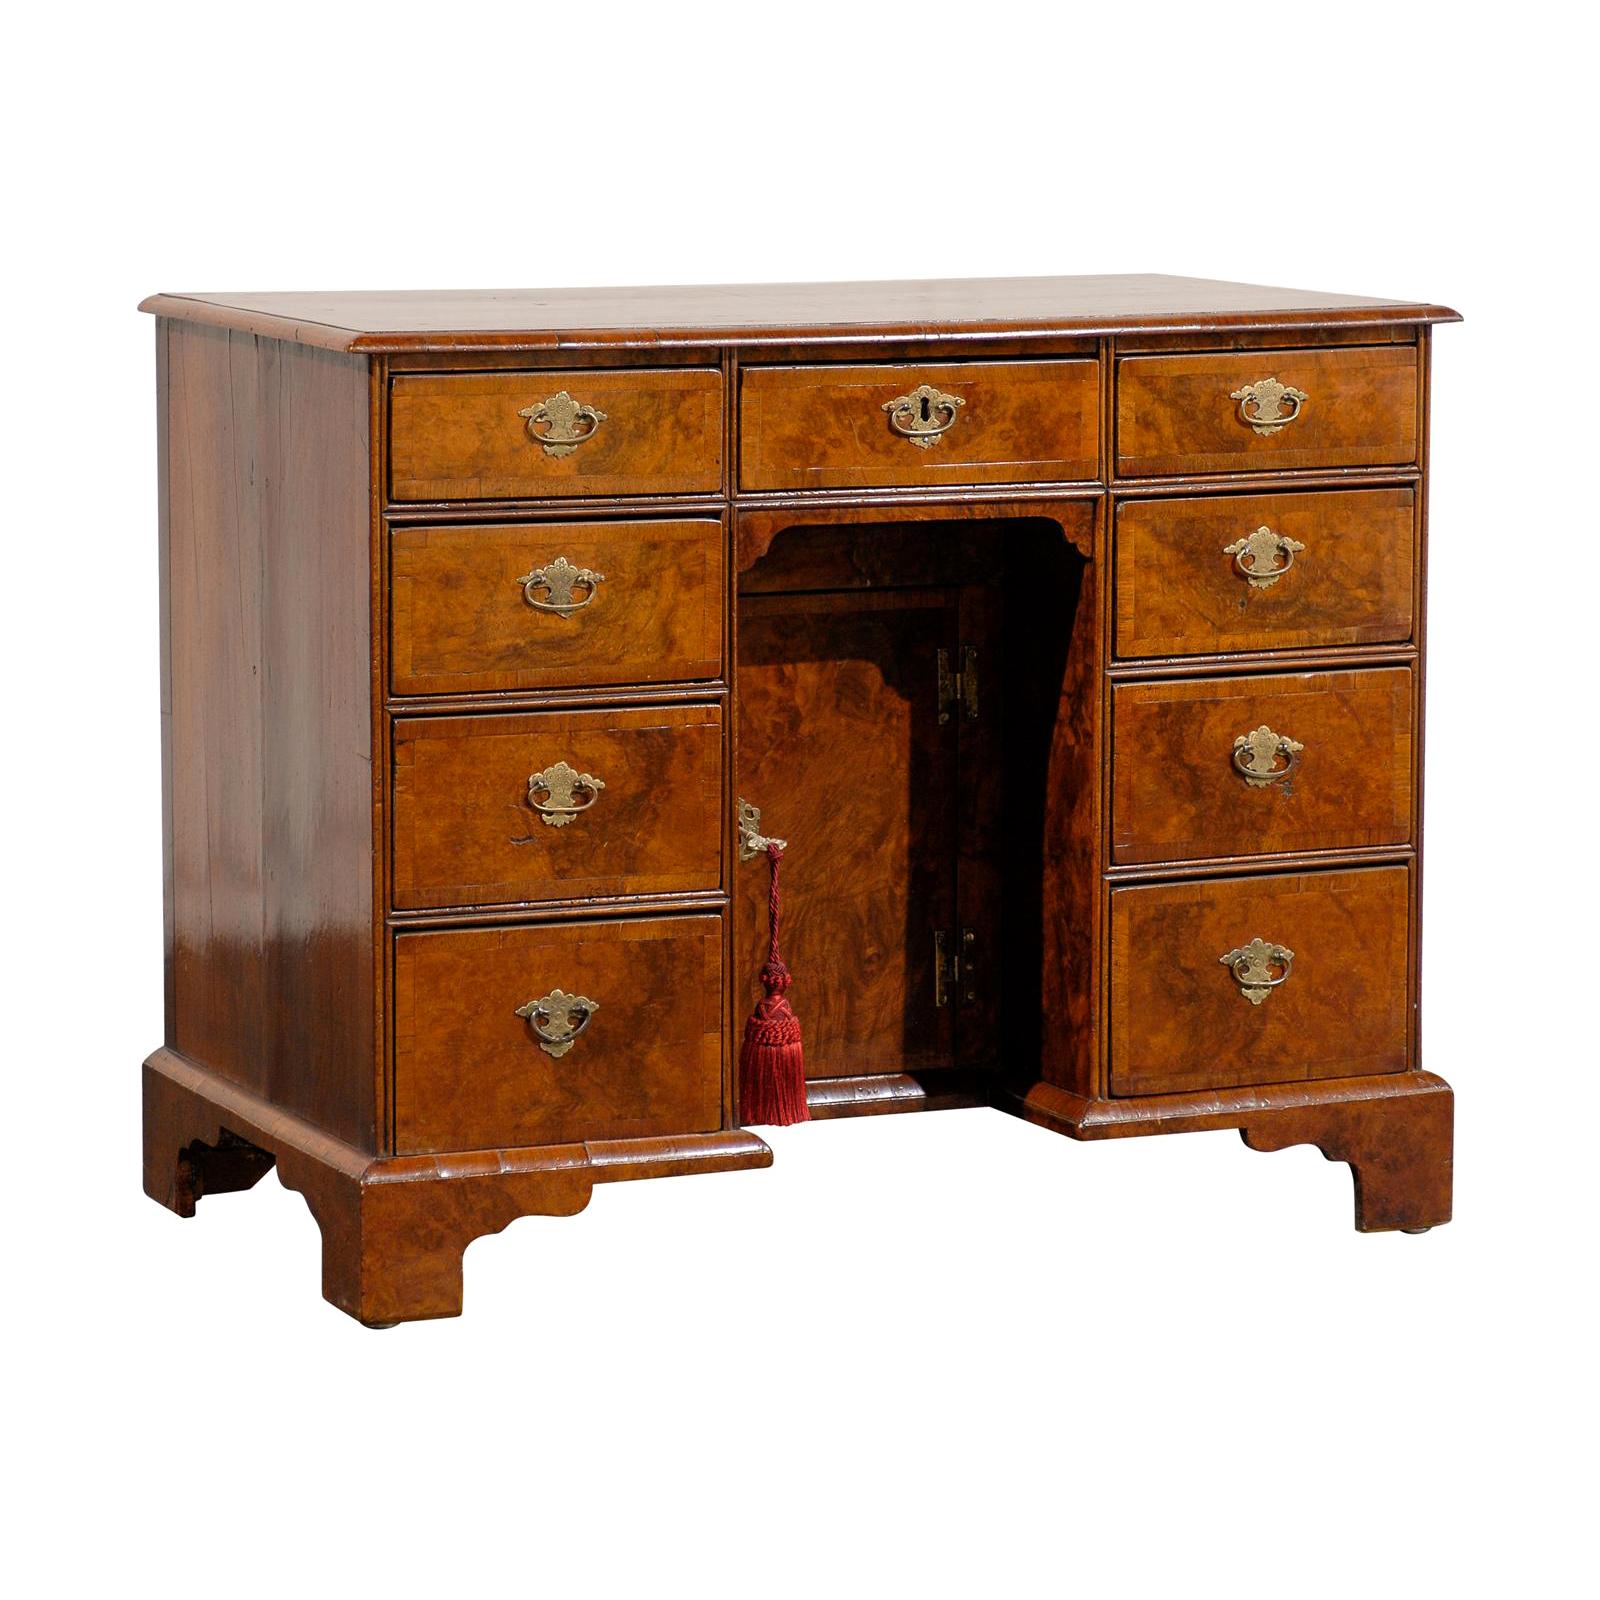 19th Century English Knee Hole Desk with Burled Walnut Top For Sale